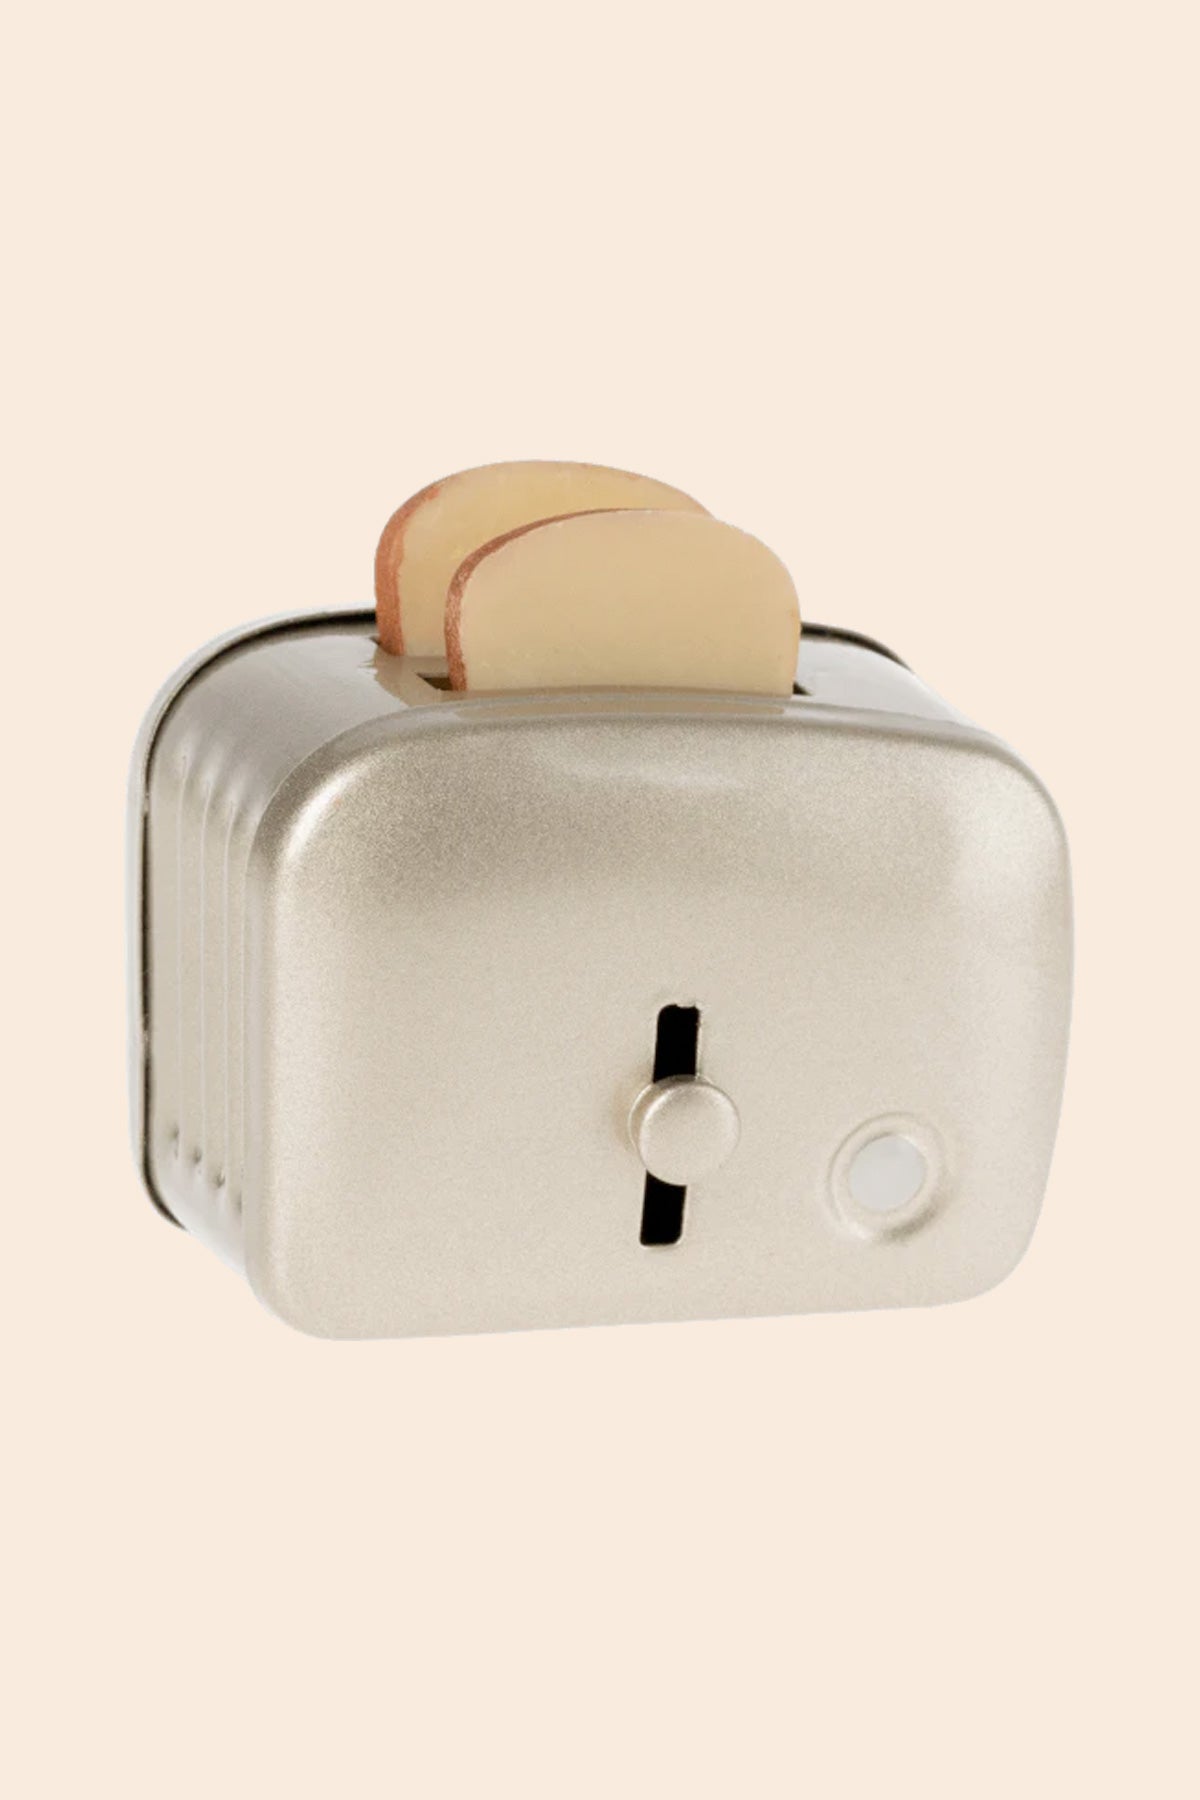 Maileg Miniature Toaster with bread-Silver